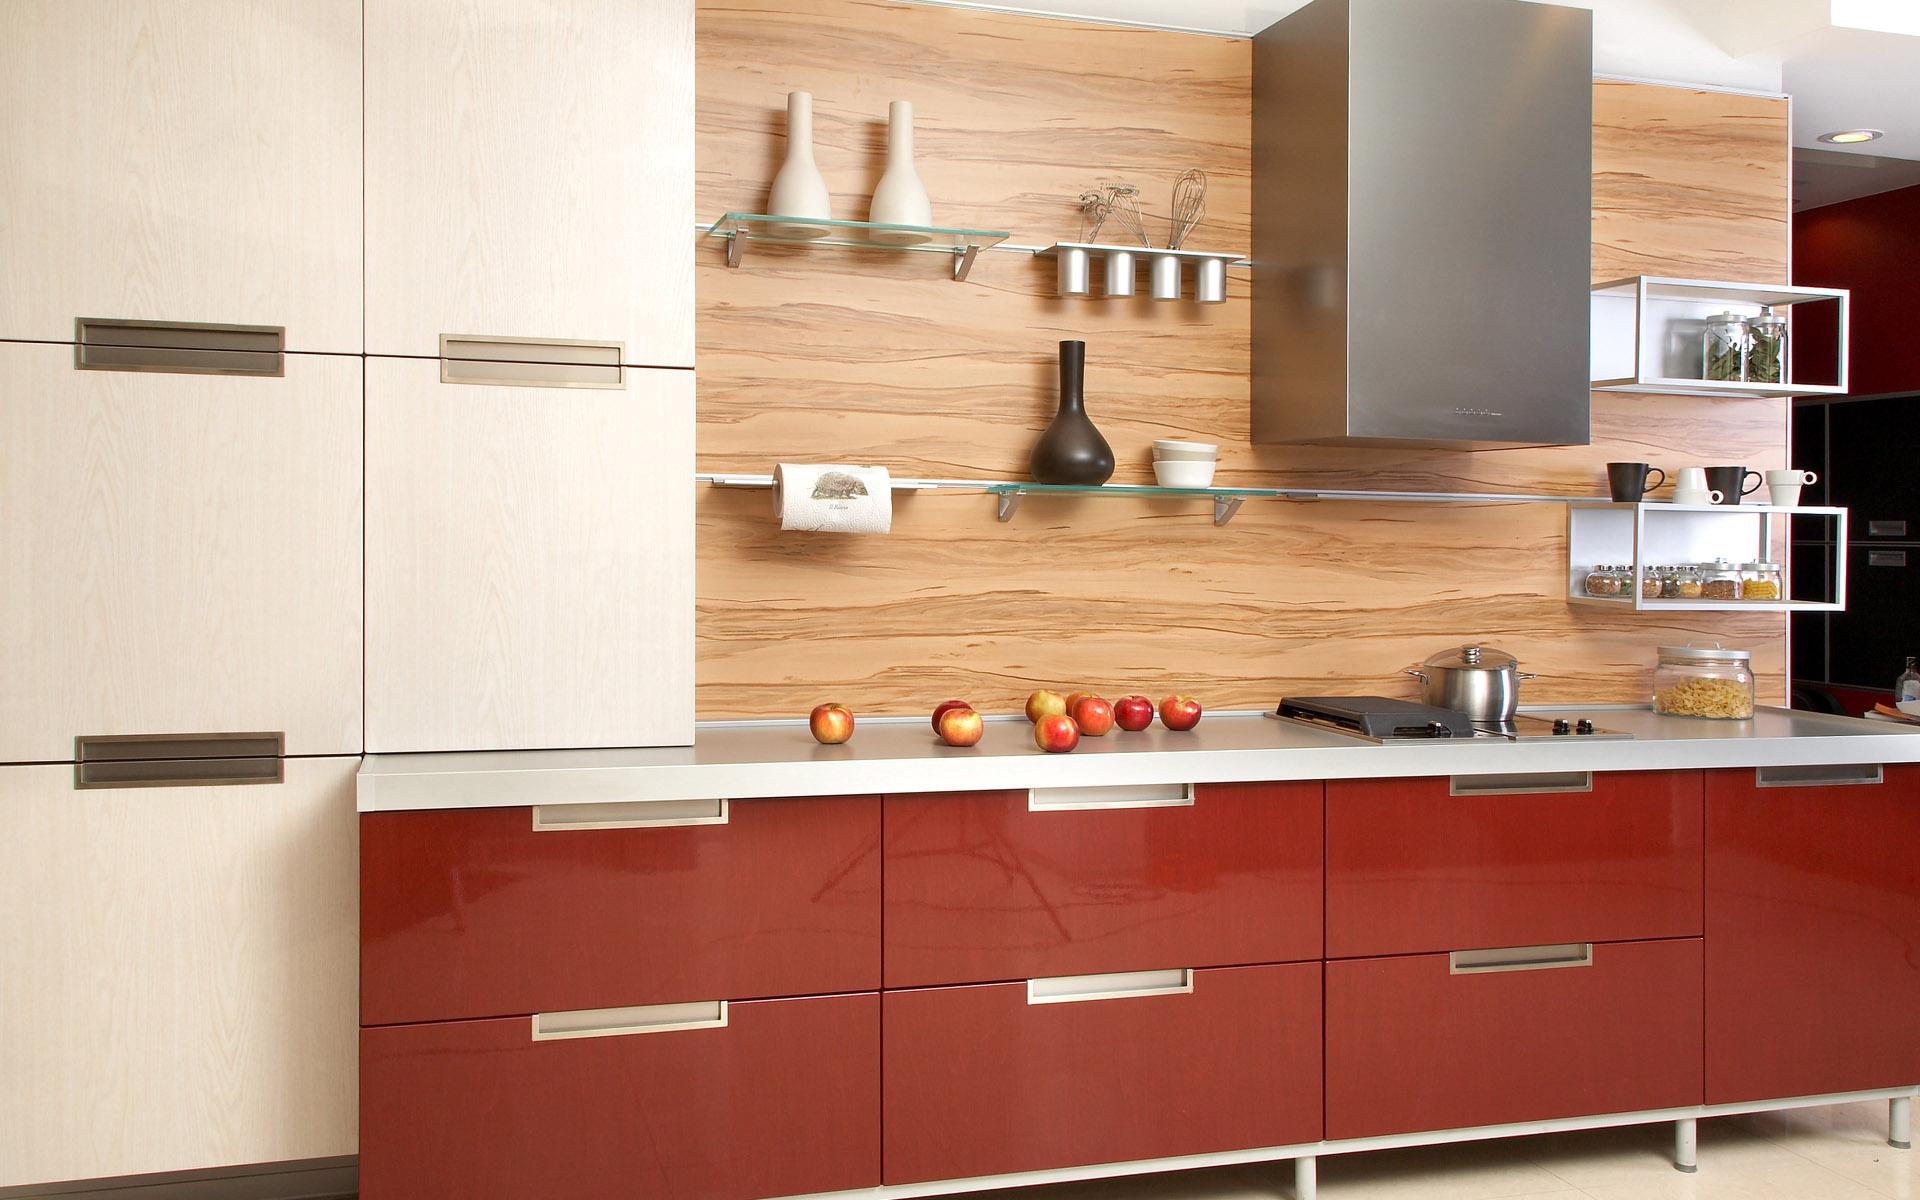 Plan Your Modular Kitchen With Useful Tips